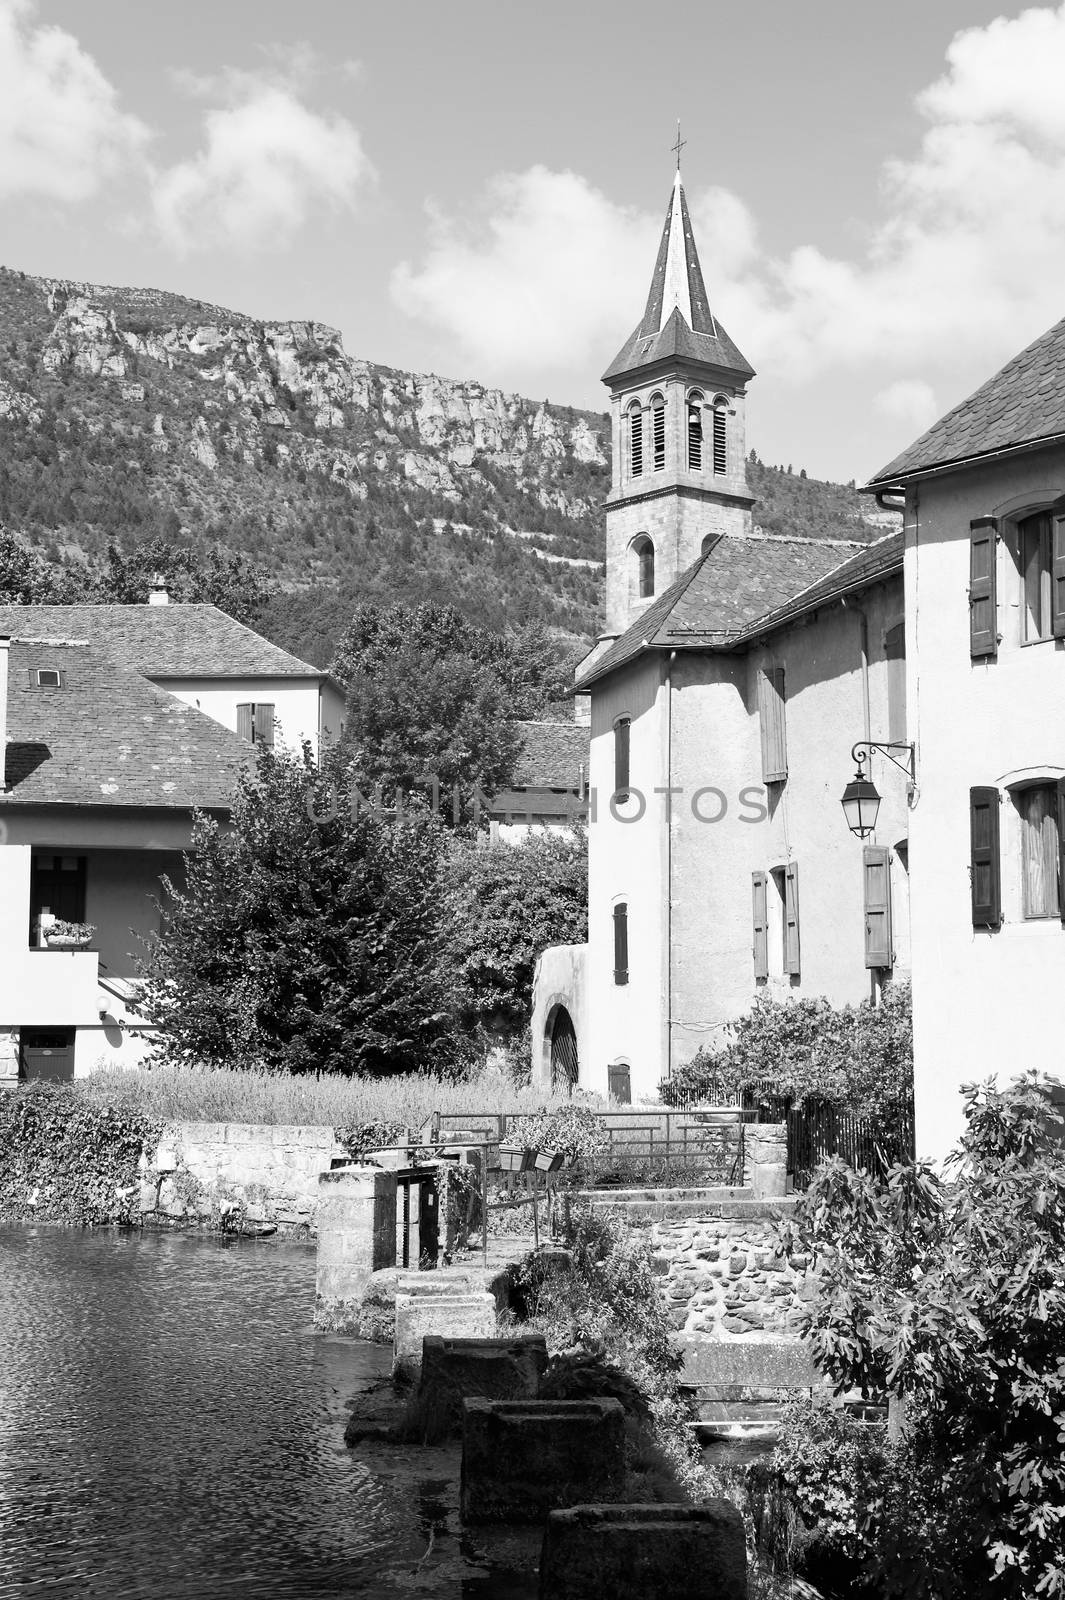 Deserted sights in France in black and white. Castle in medieval French city of Florac